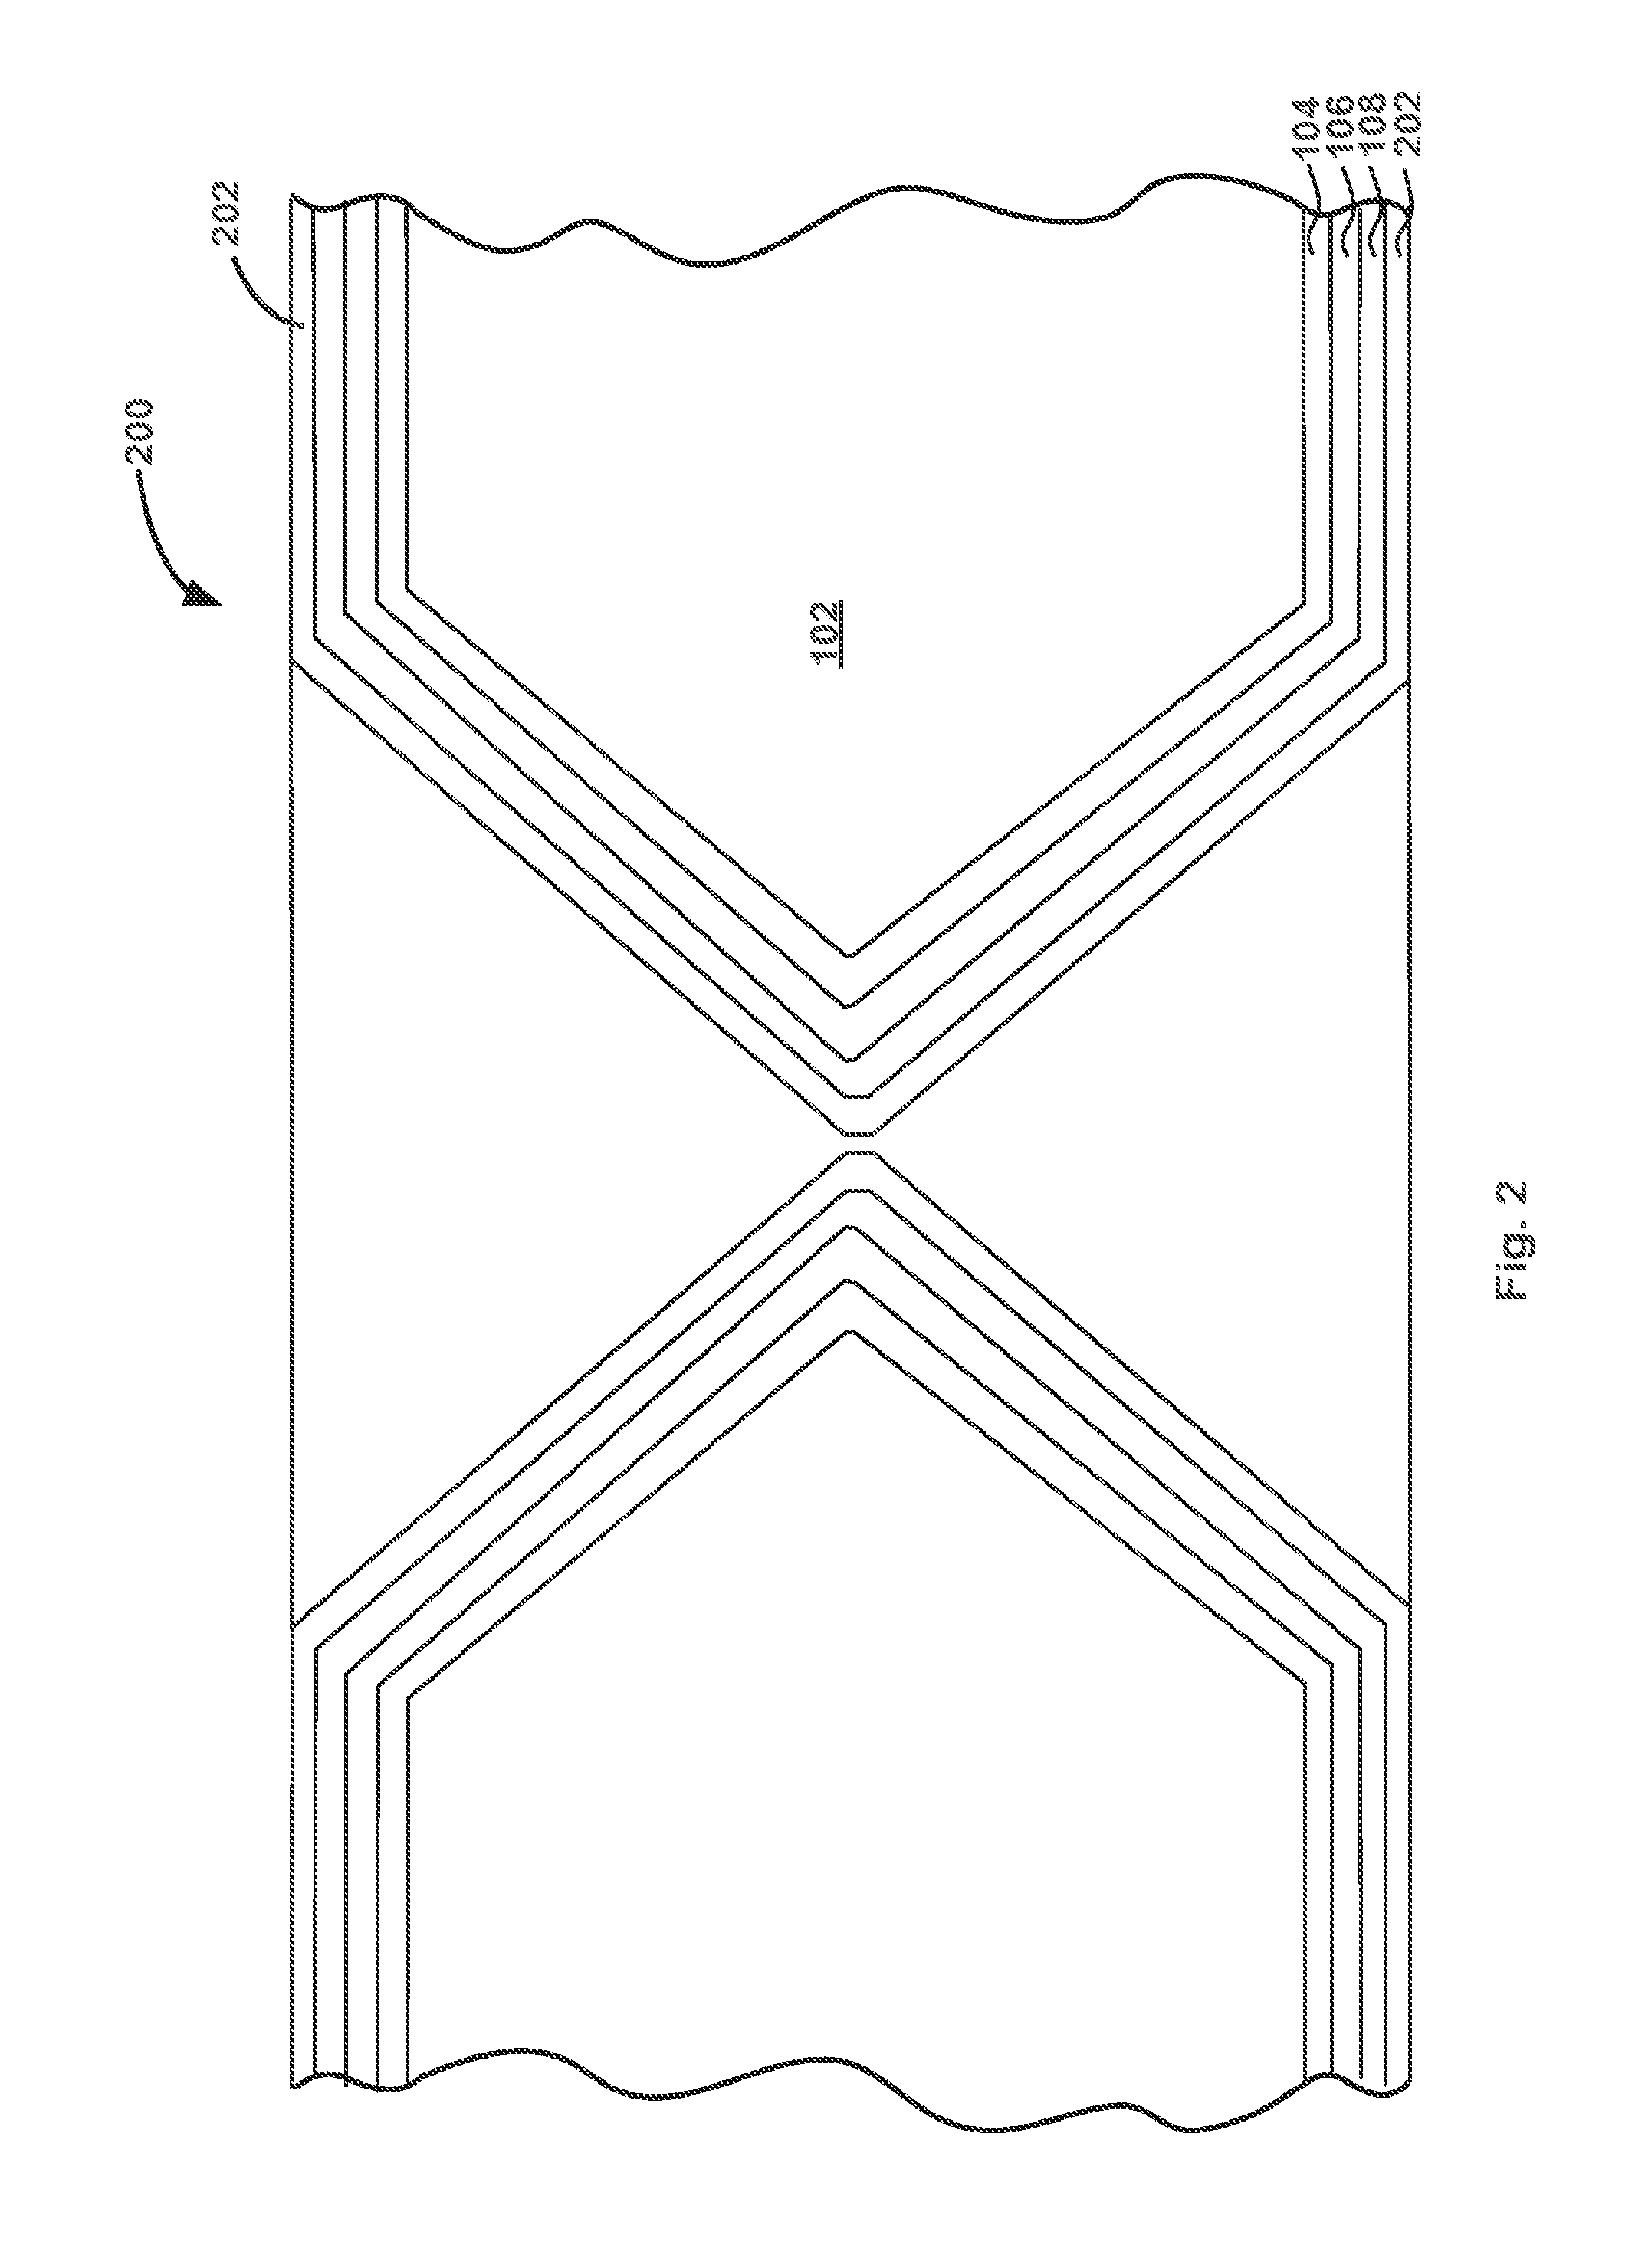 Field effect transistor, device including the transistor, and methods of forming and using same